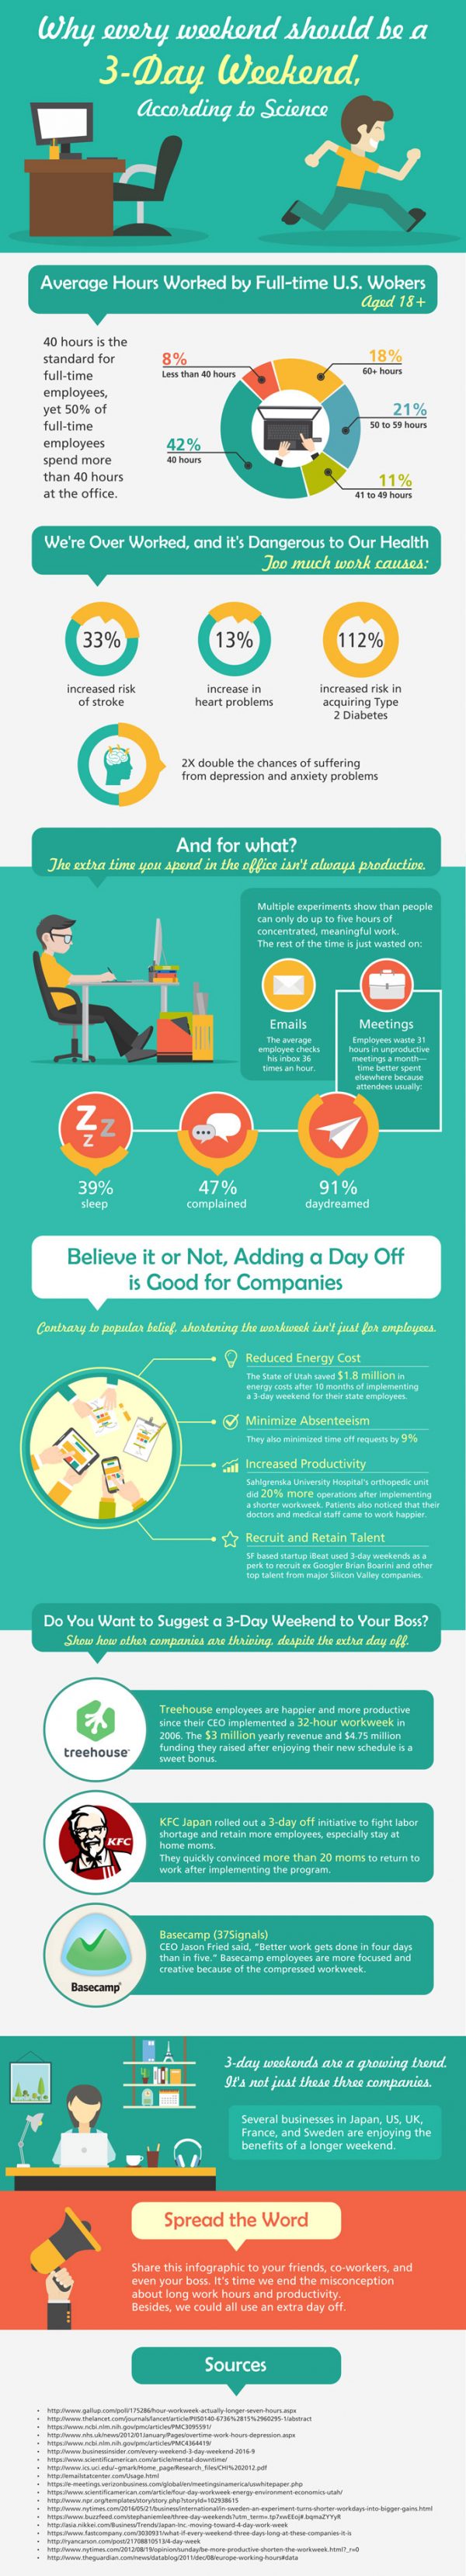 Scientific Argument for 3Day Weekends [Infographic] Best Infographics